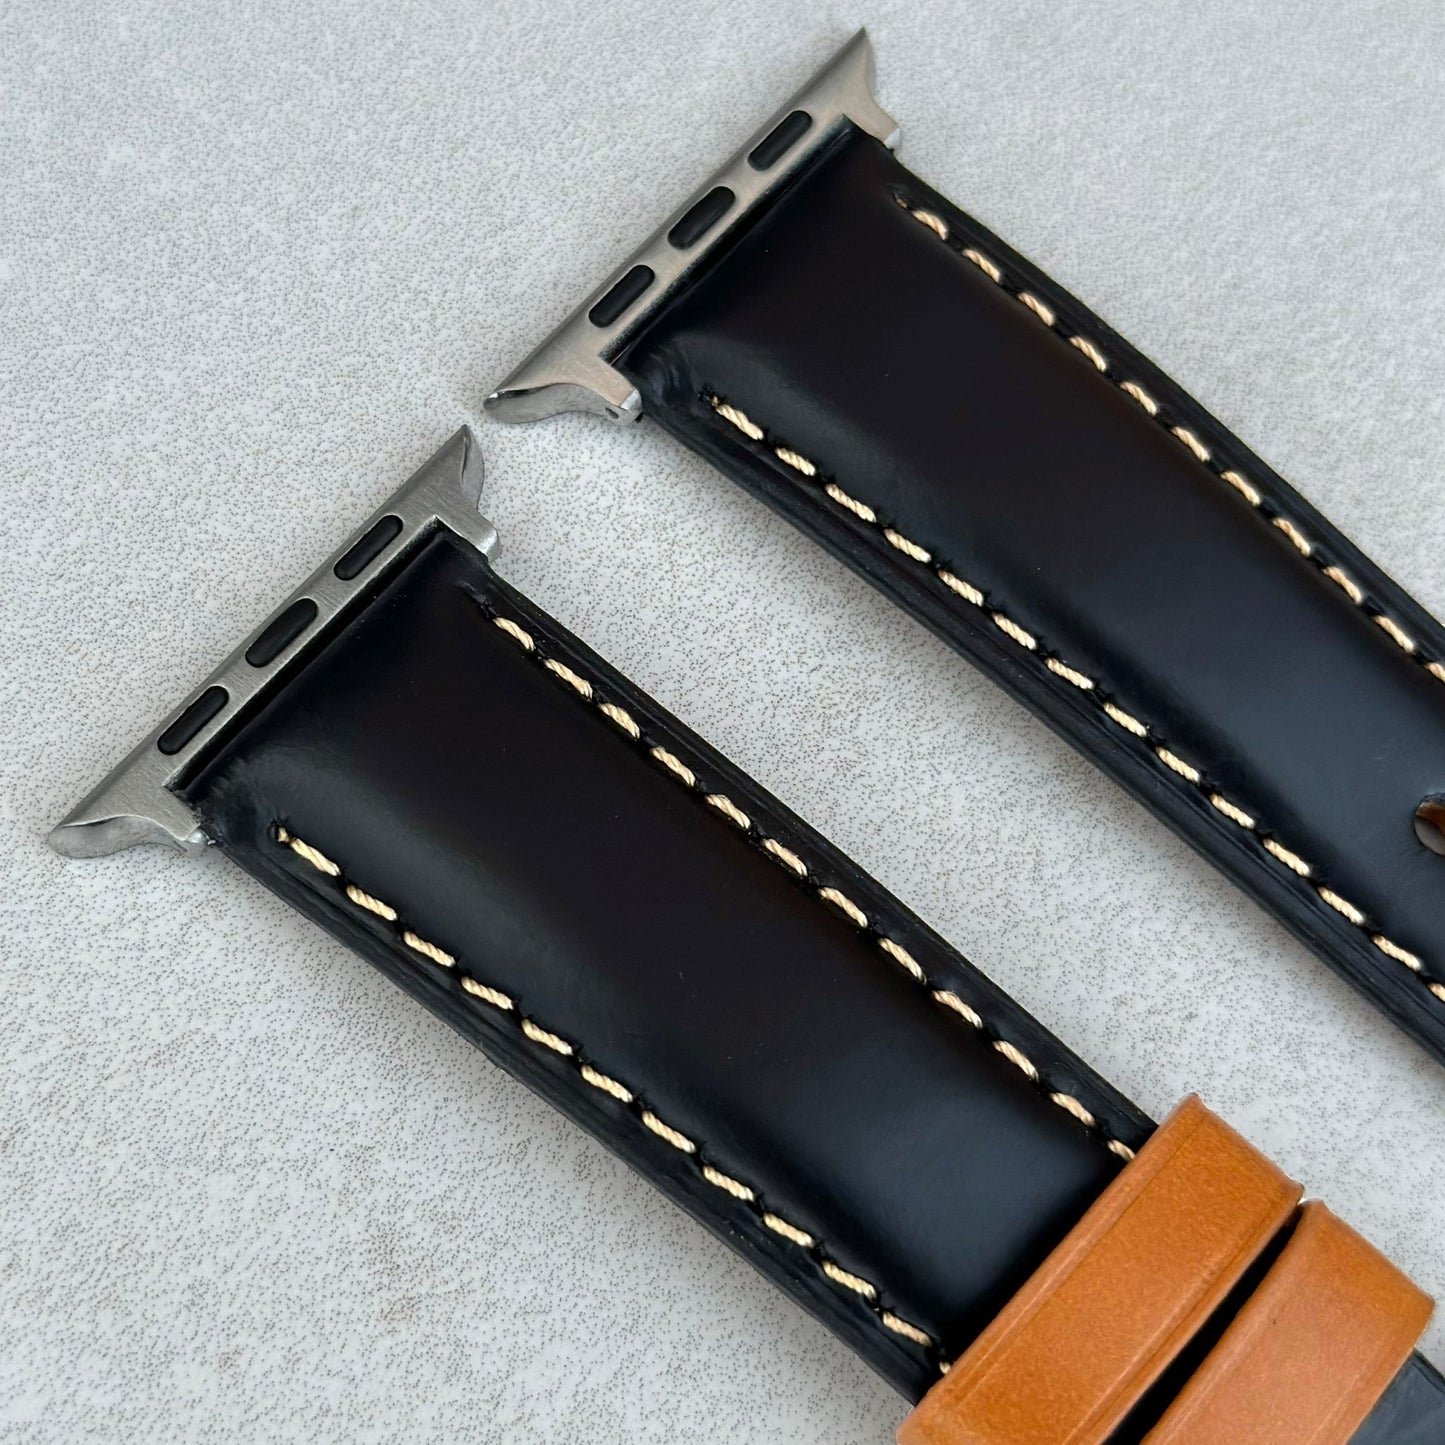 Top of the Oxford black full grain leather Apple Watch strap. Padded leather Apple Watch strap. Contrast ivory stitching.